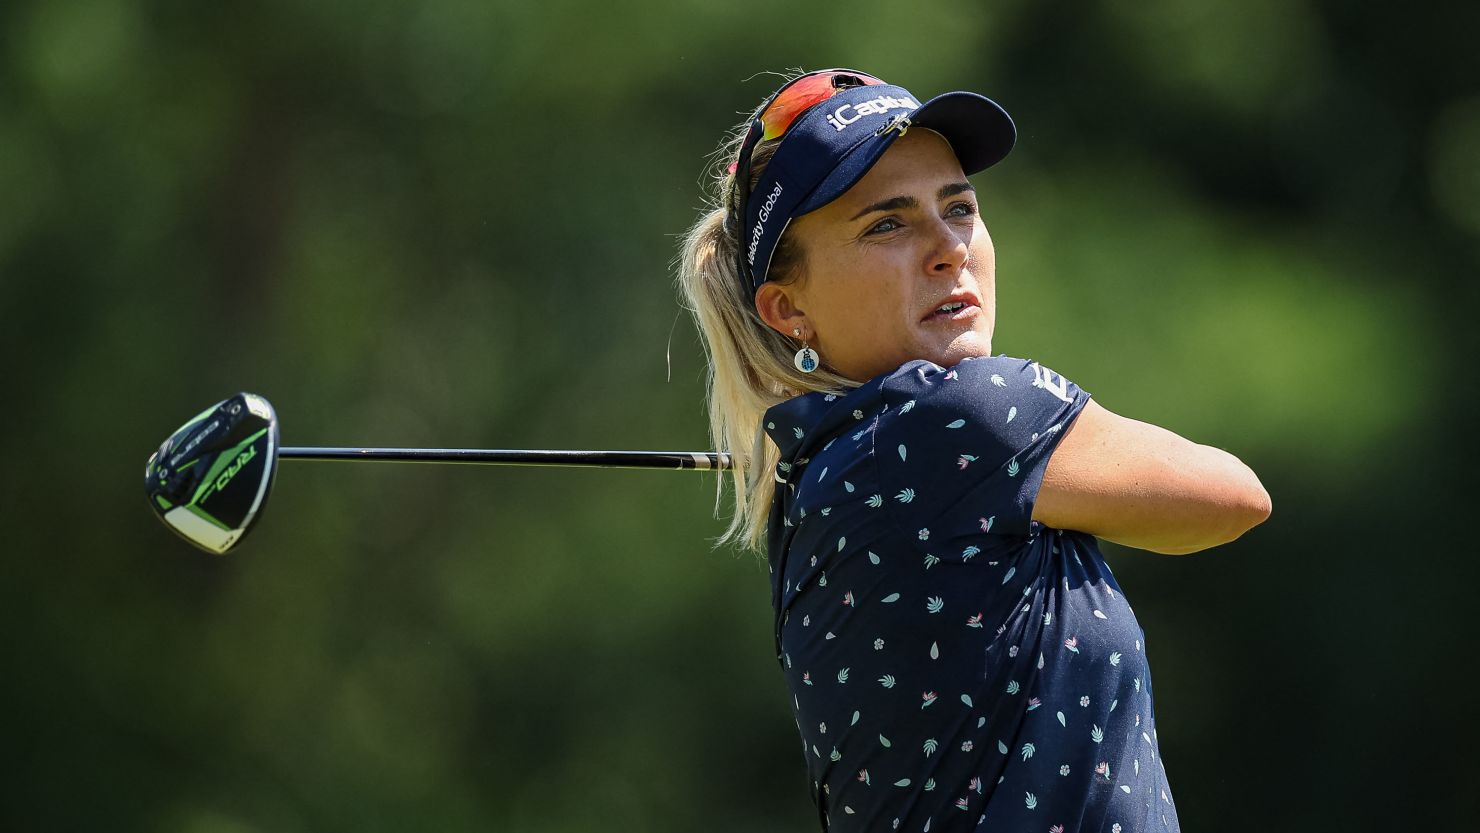 Lexi Thompson plays her shot from the fifth tee during the final round of the 2022 KPMG Women's PGA Championship golf tournament at Congressional Country Club.